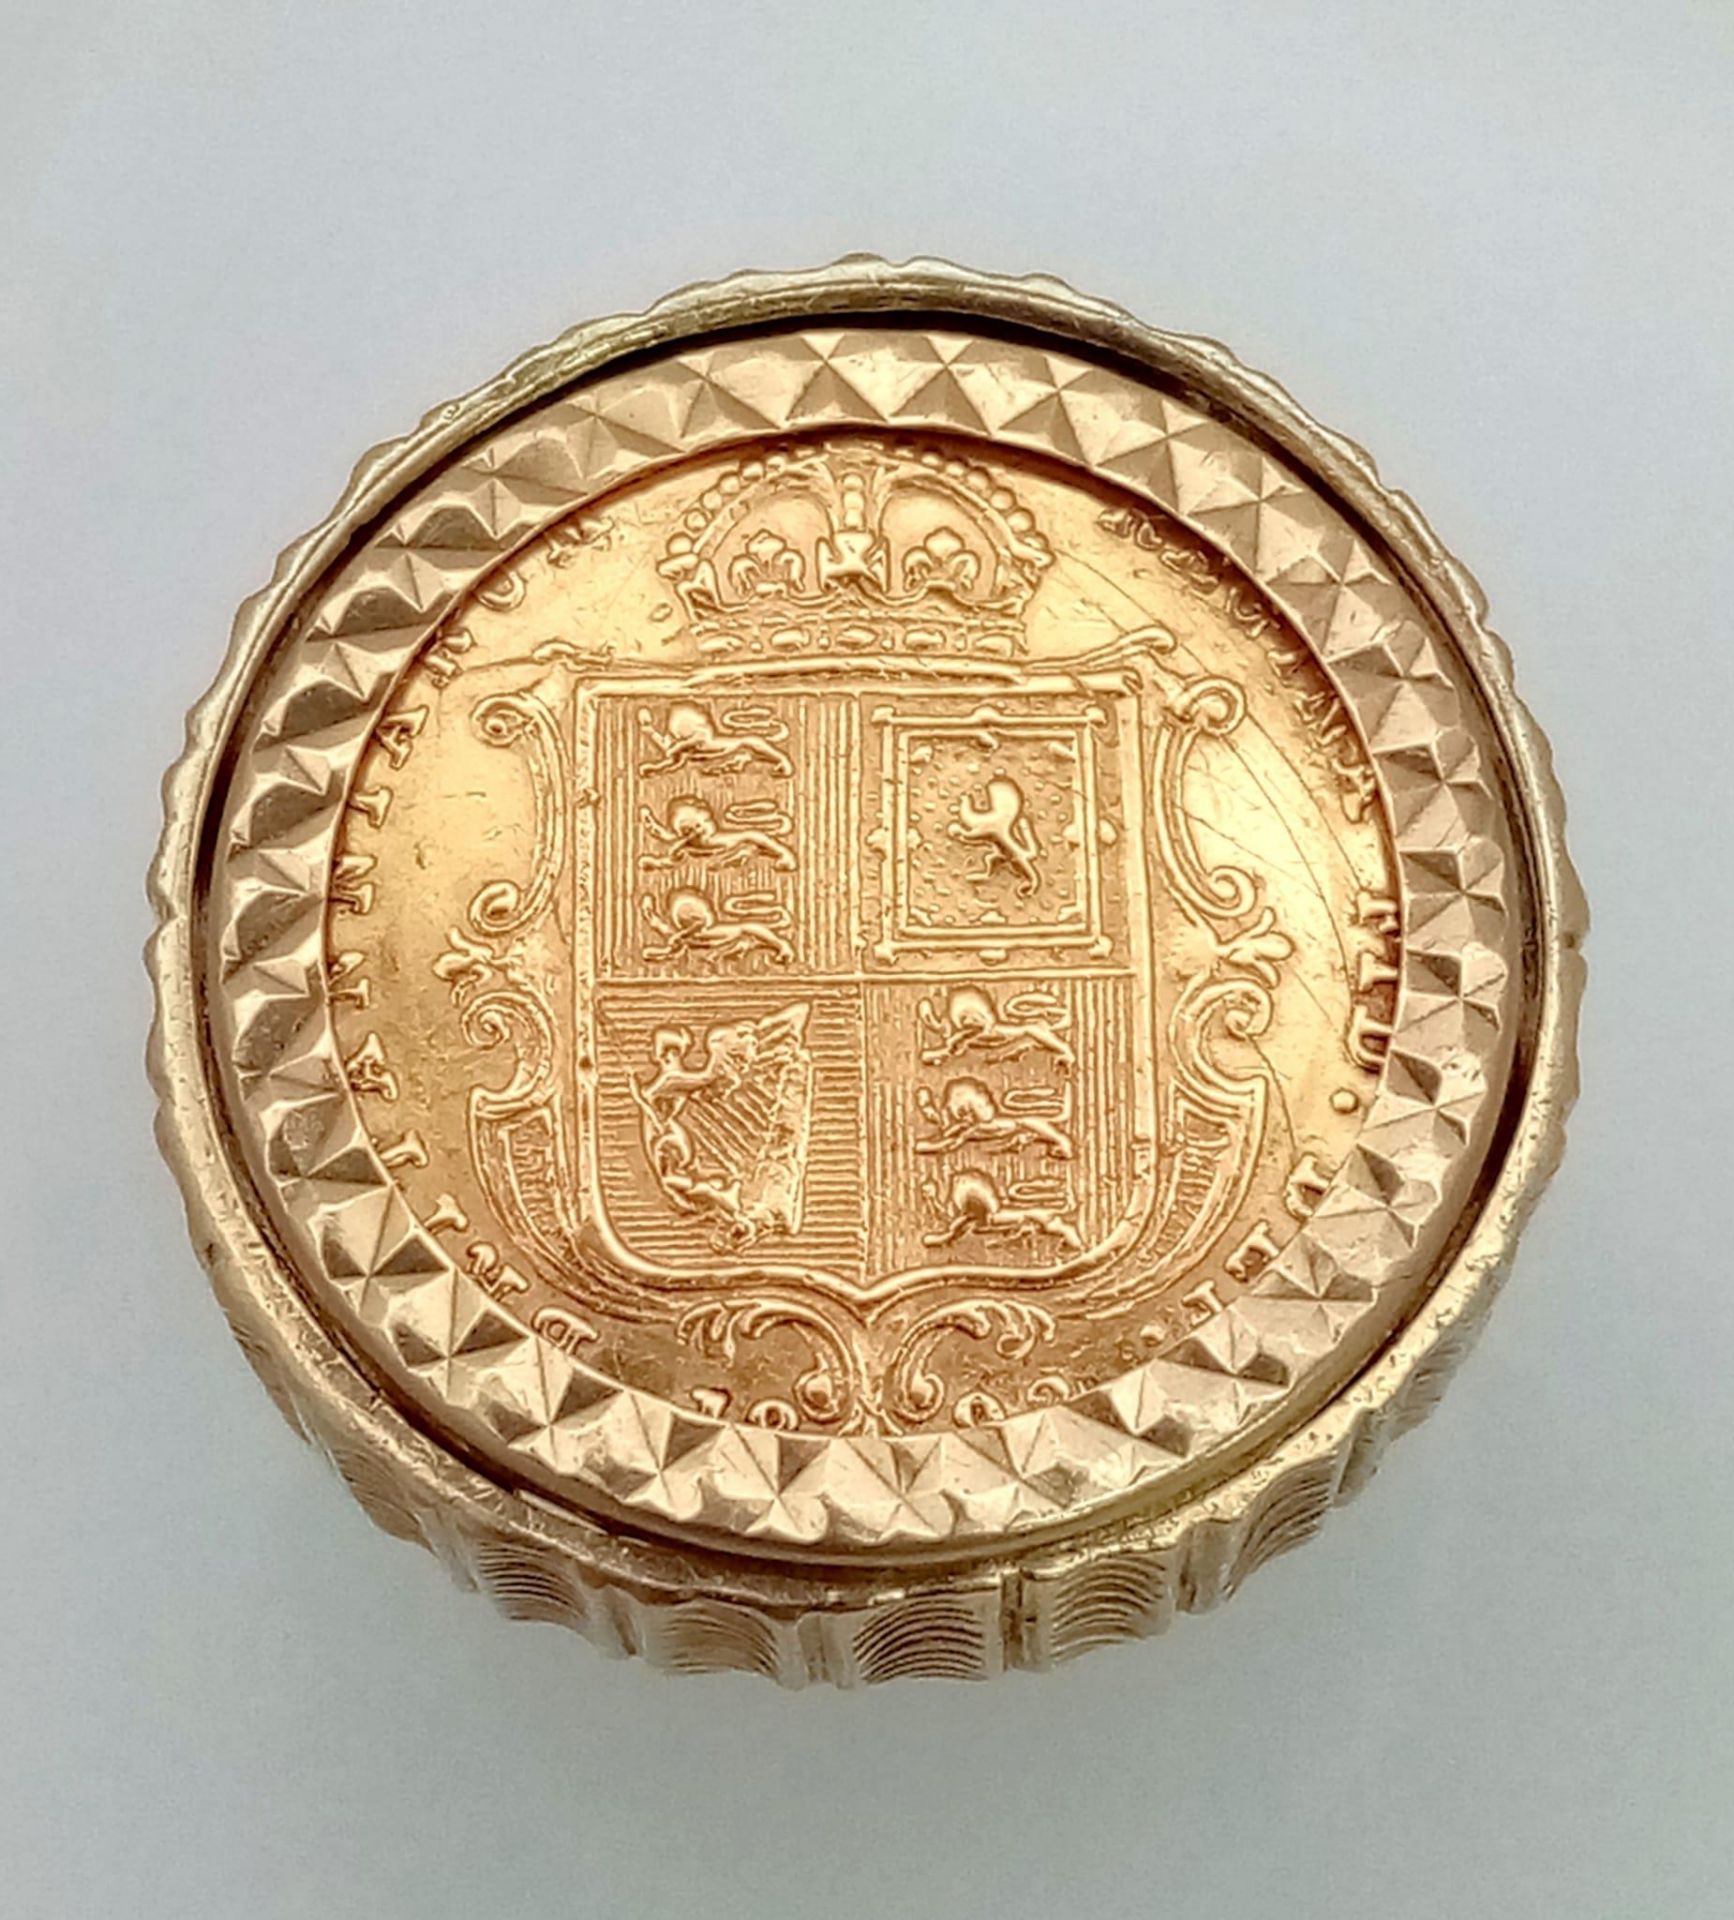 22k yellow gold half sovereign coin with Queen Victoria, dated 1892, set into a 9k yellow gold - Image 2 of 4